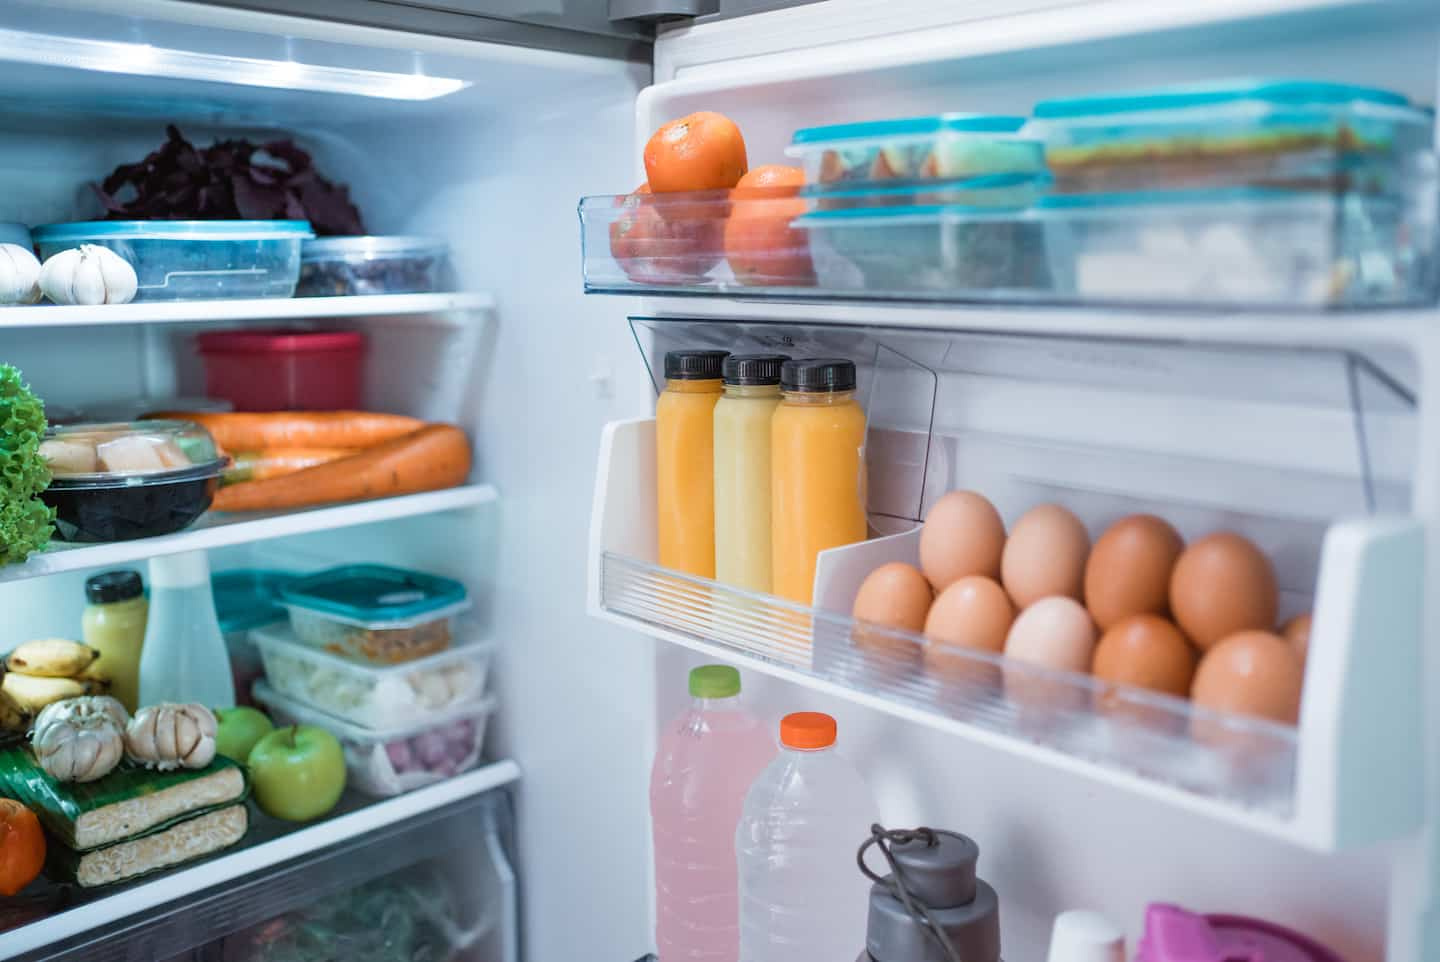 Power outage: what to do with the contents of your fridge?